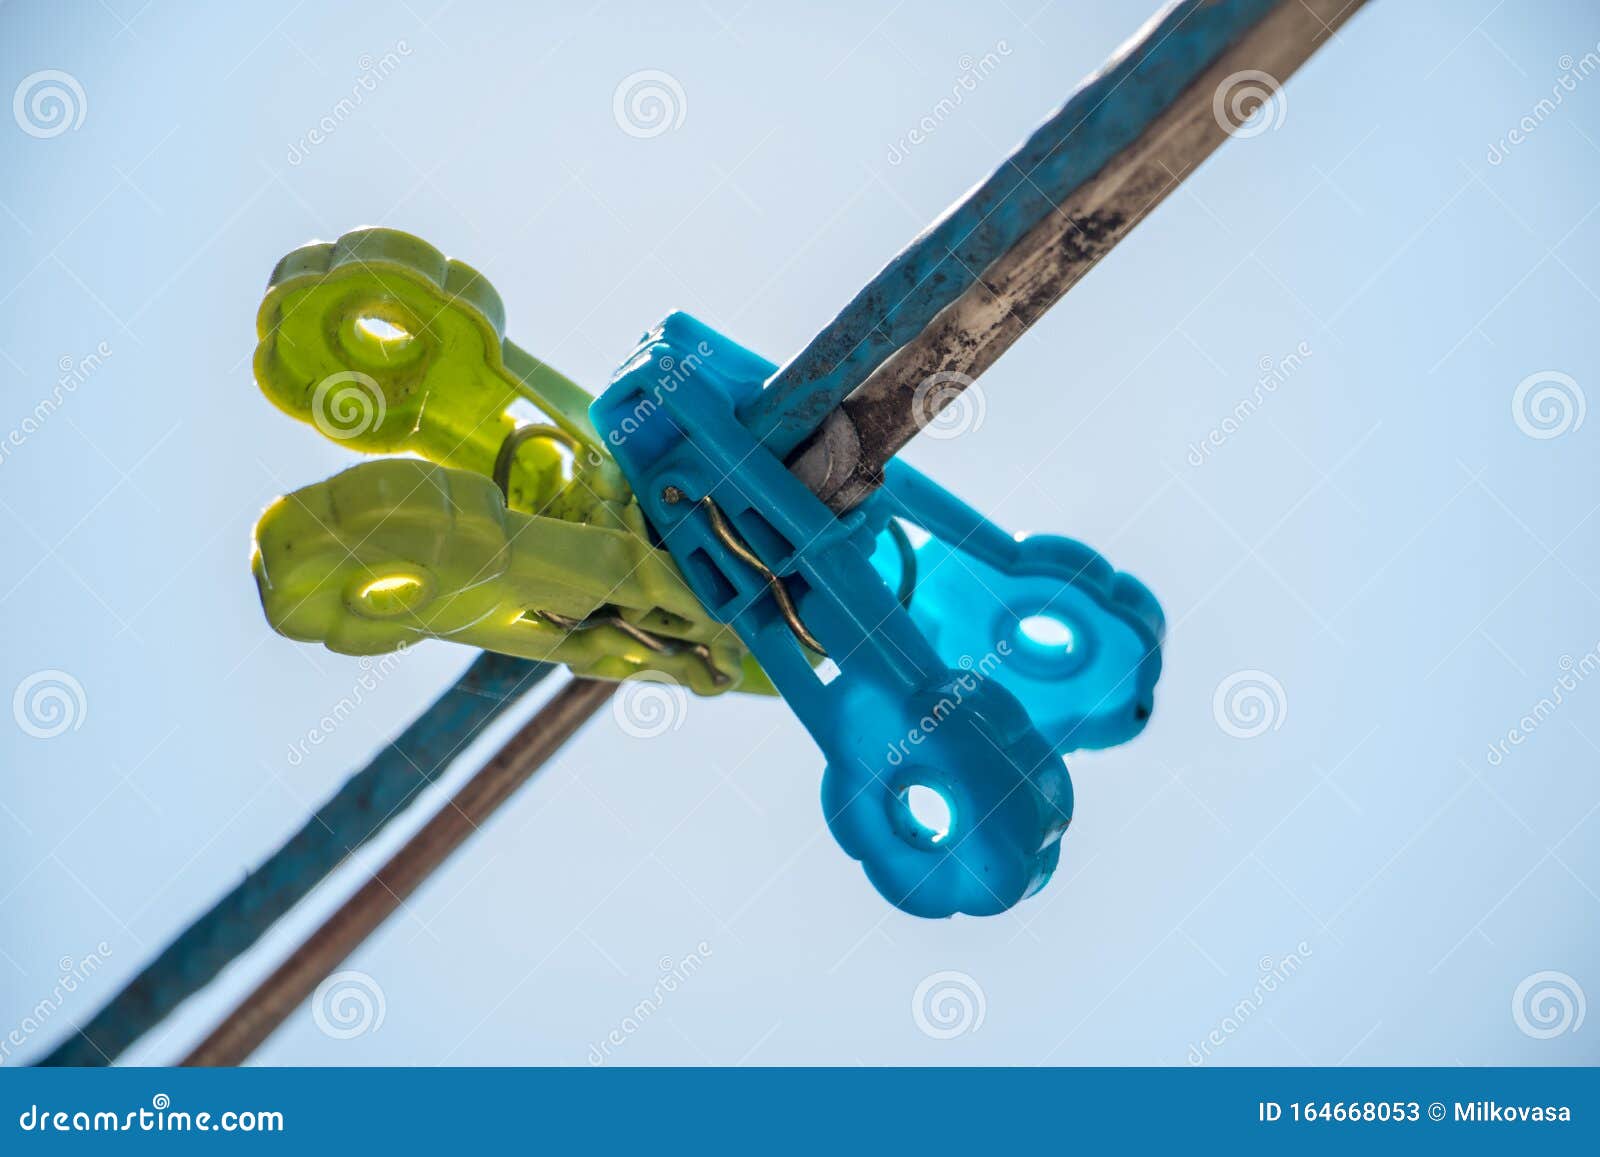 Clothes Pegs Hanging on a Cord Against the Blue Sky. Stock Image ...